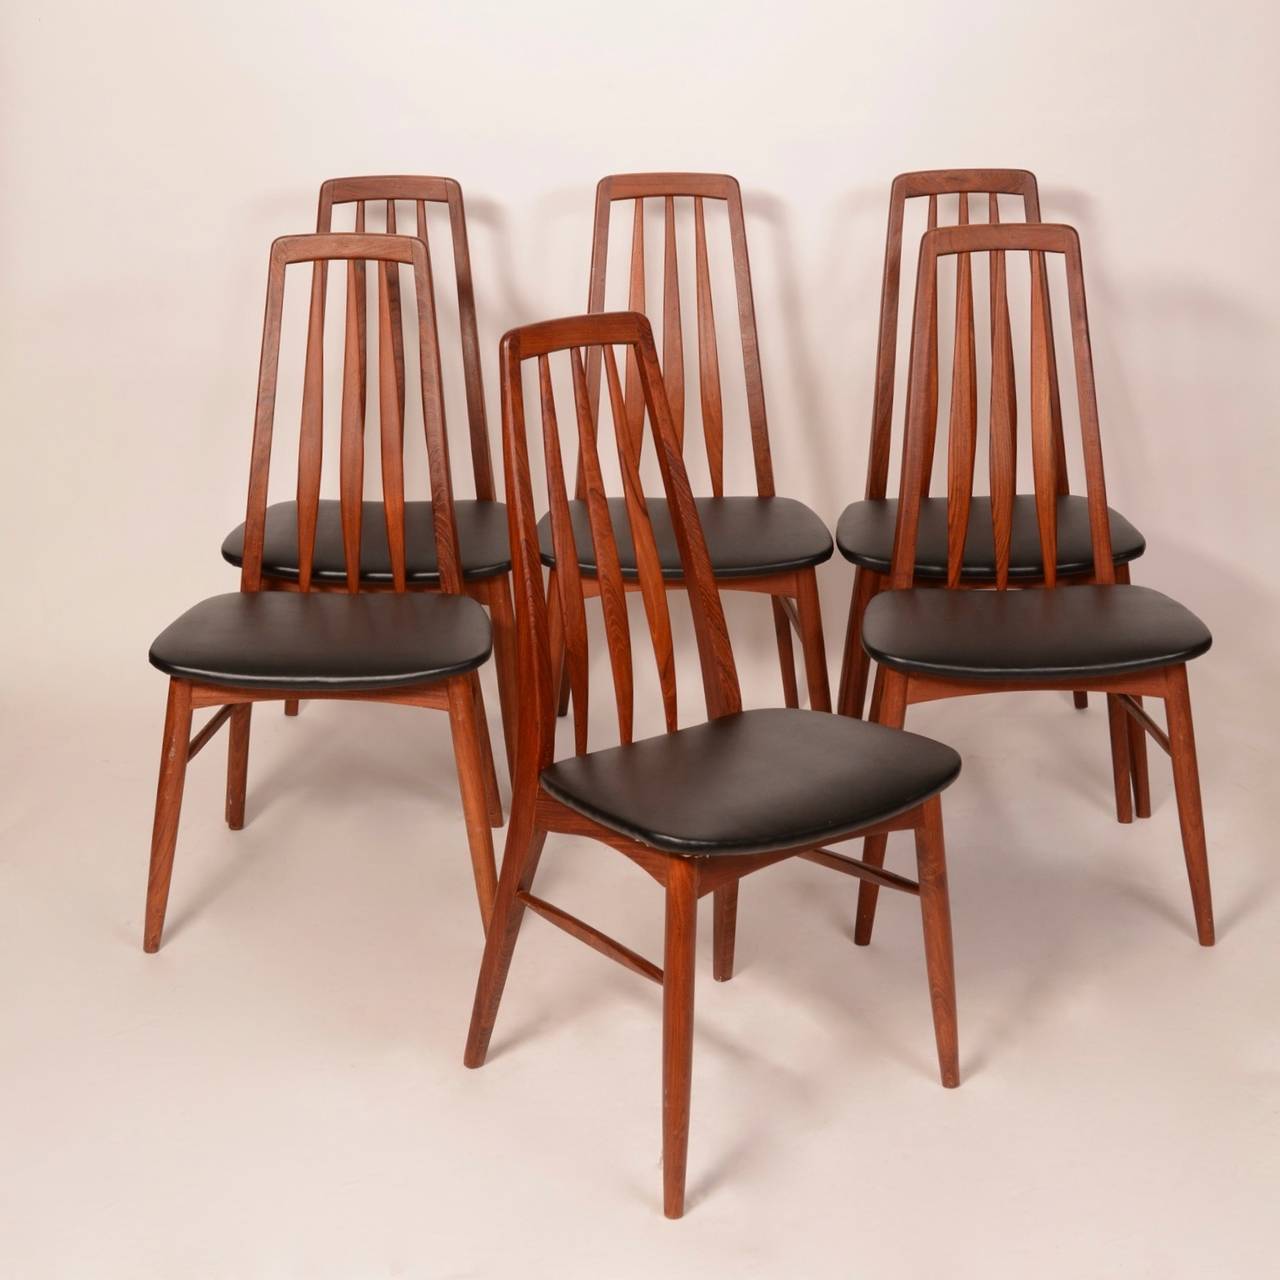 The Eva chair by Niels Koefoed for Hornslet Mobelfabrik in teak. New high grade vinyl upholstery.  Chairs are in good vintage condition.  We have only 2 left in stock.  price is per chair.